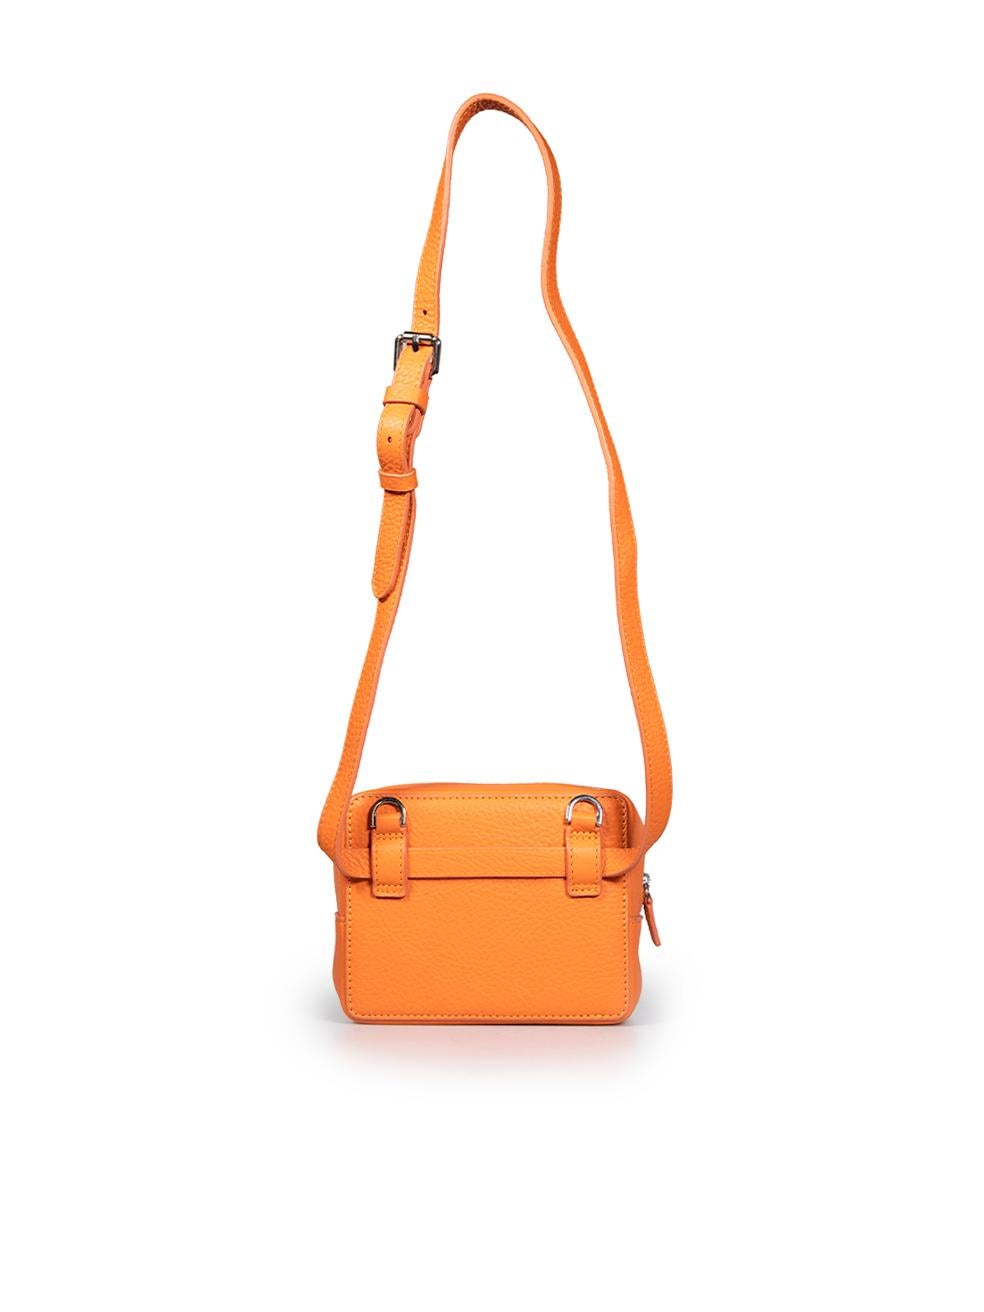 Pickett Orange Leather Convertible Bag In Good Condition For Sale In London, GB